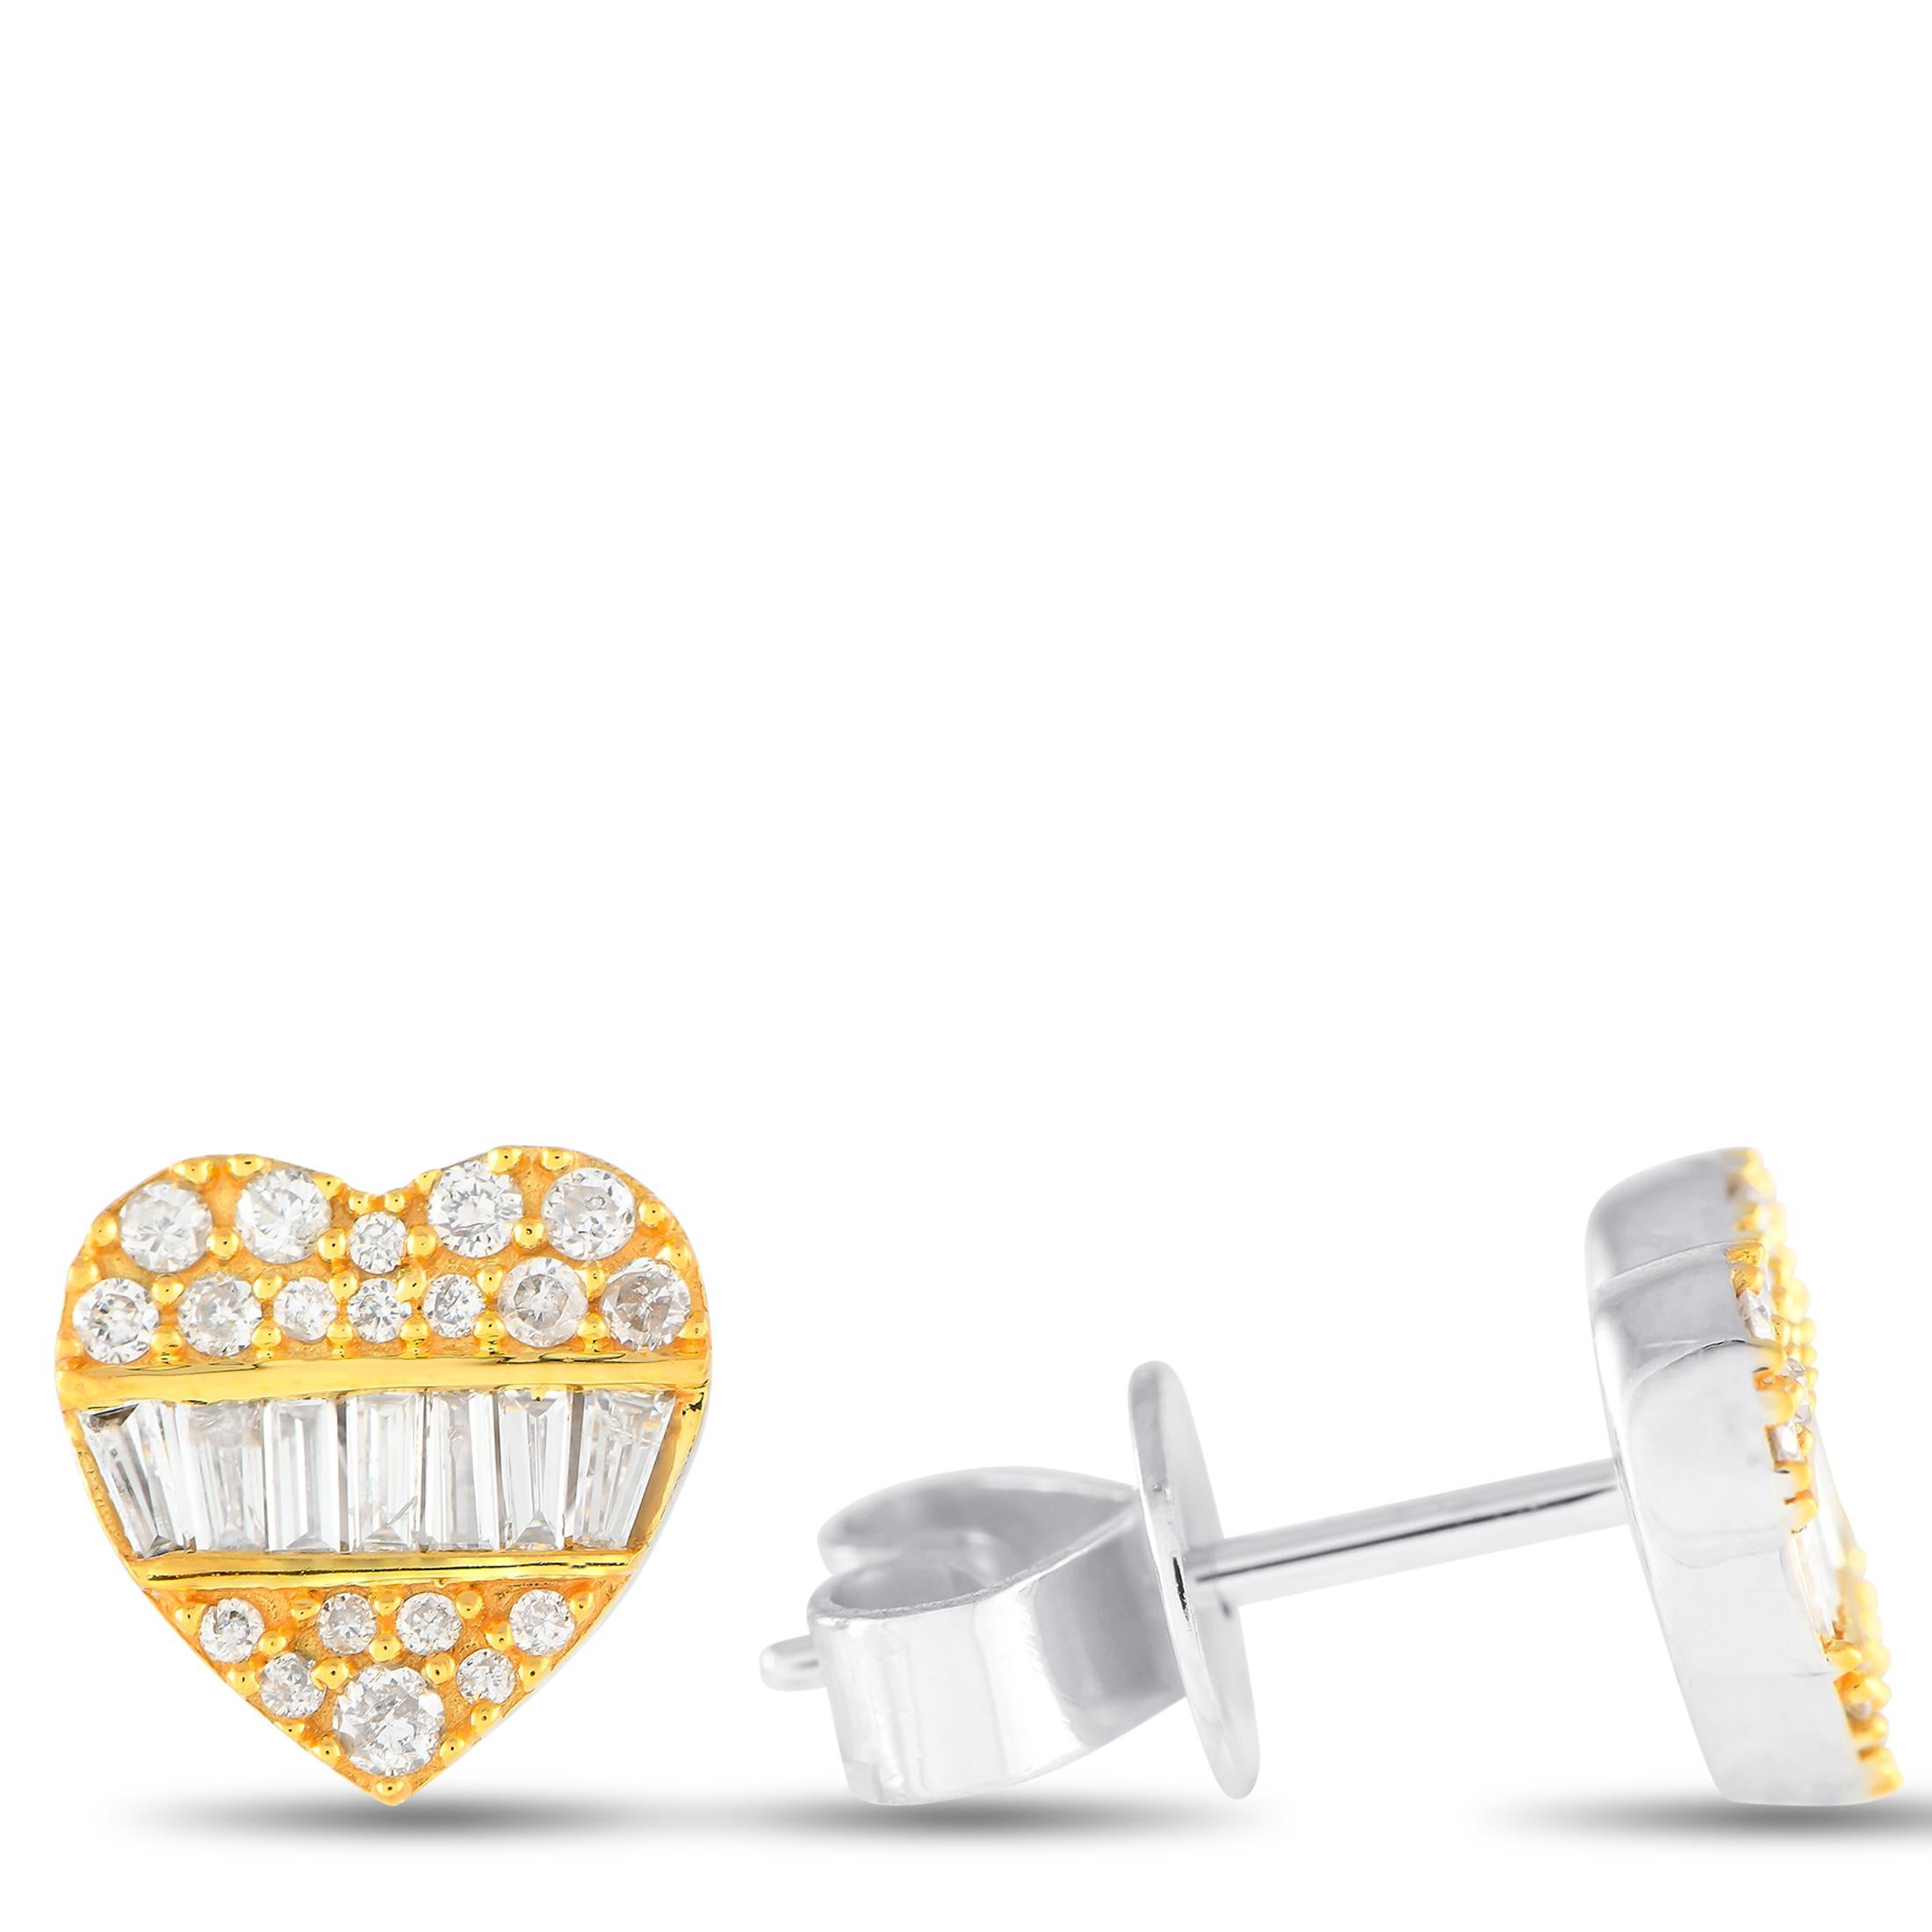 These heart-shaped earrings will continually impress. Sparkling Diamonds with a total weight of 0.35 carats allow them to effortlessly catch the light. Crafted from a combination of 14K White Gold and 14K Yellow Gold, each one measures 0.35” long